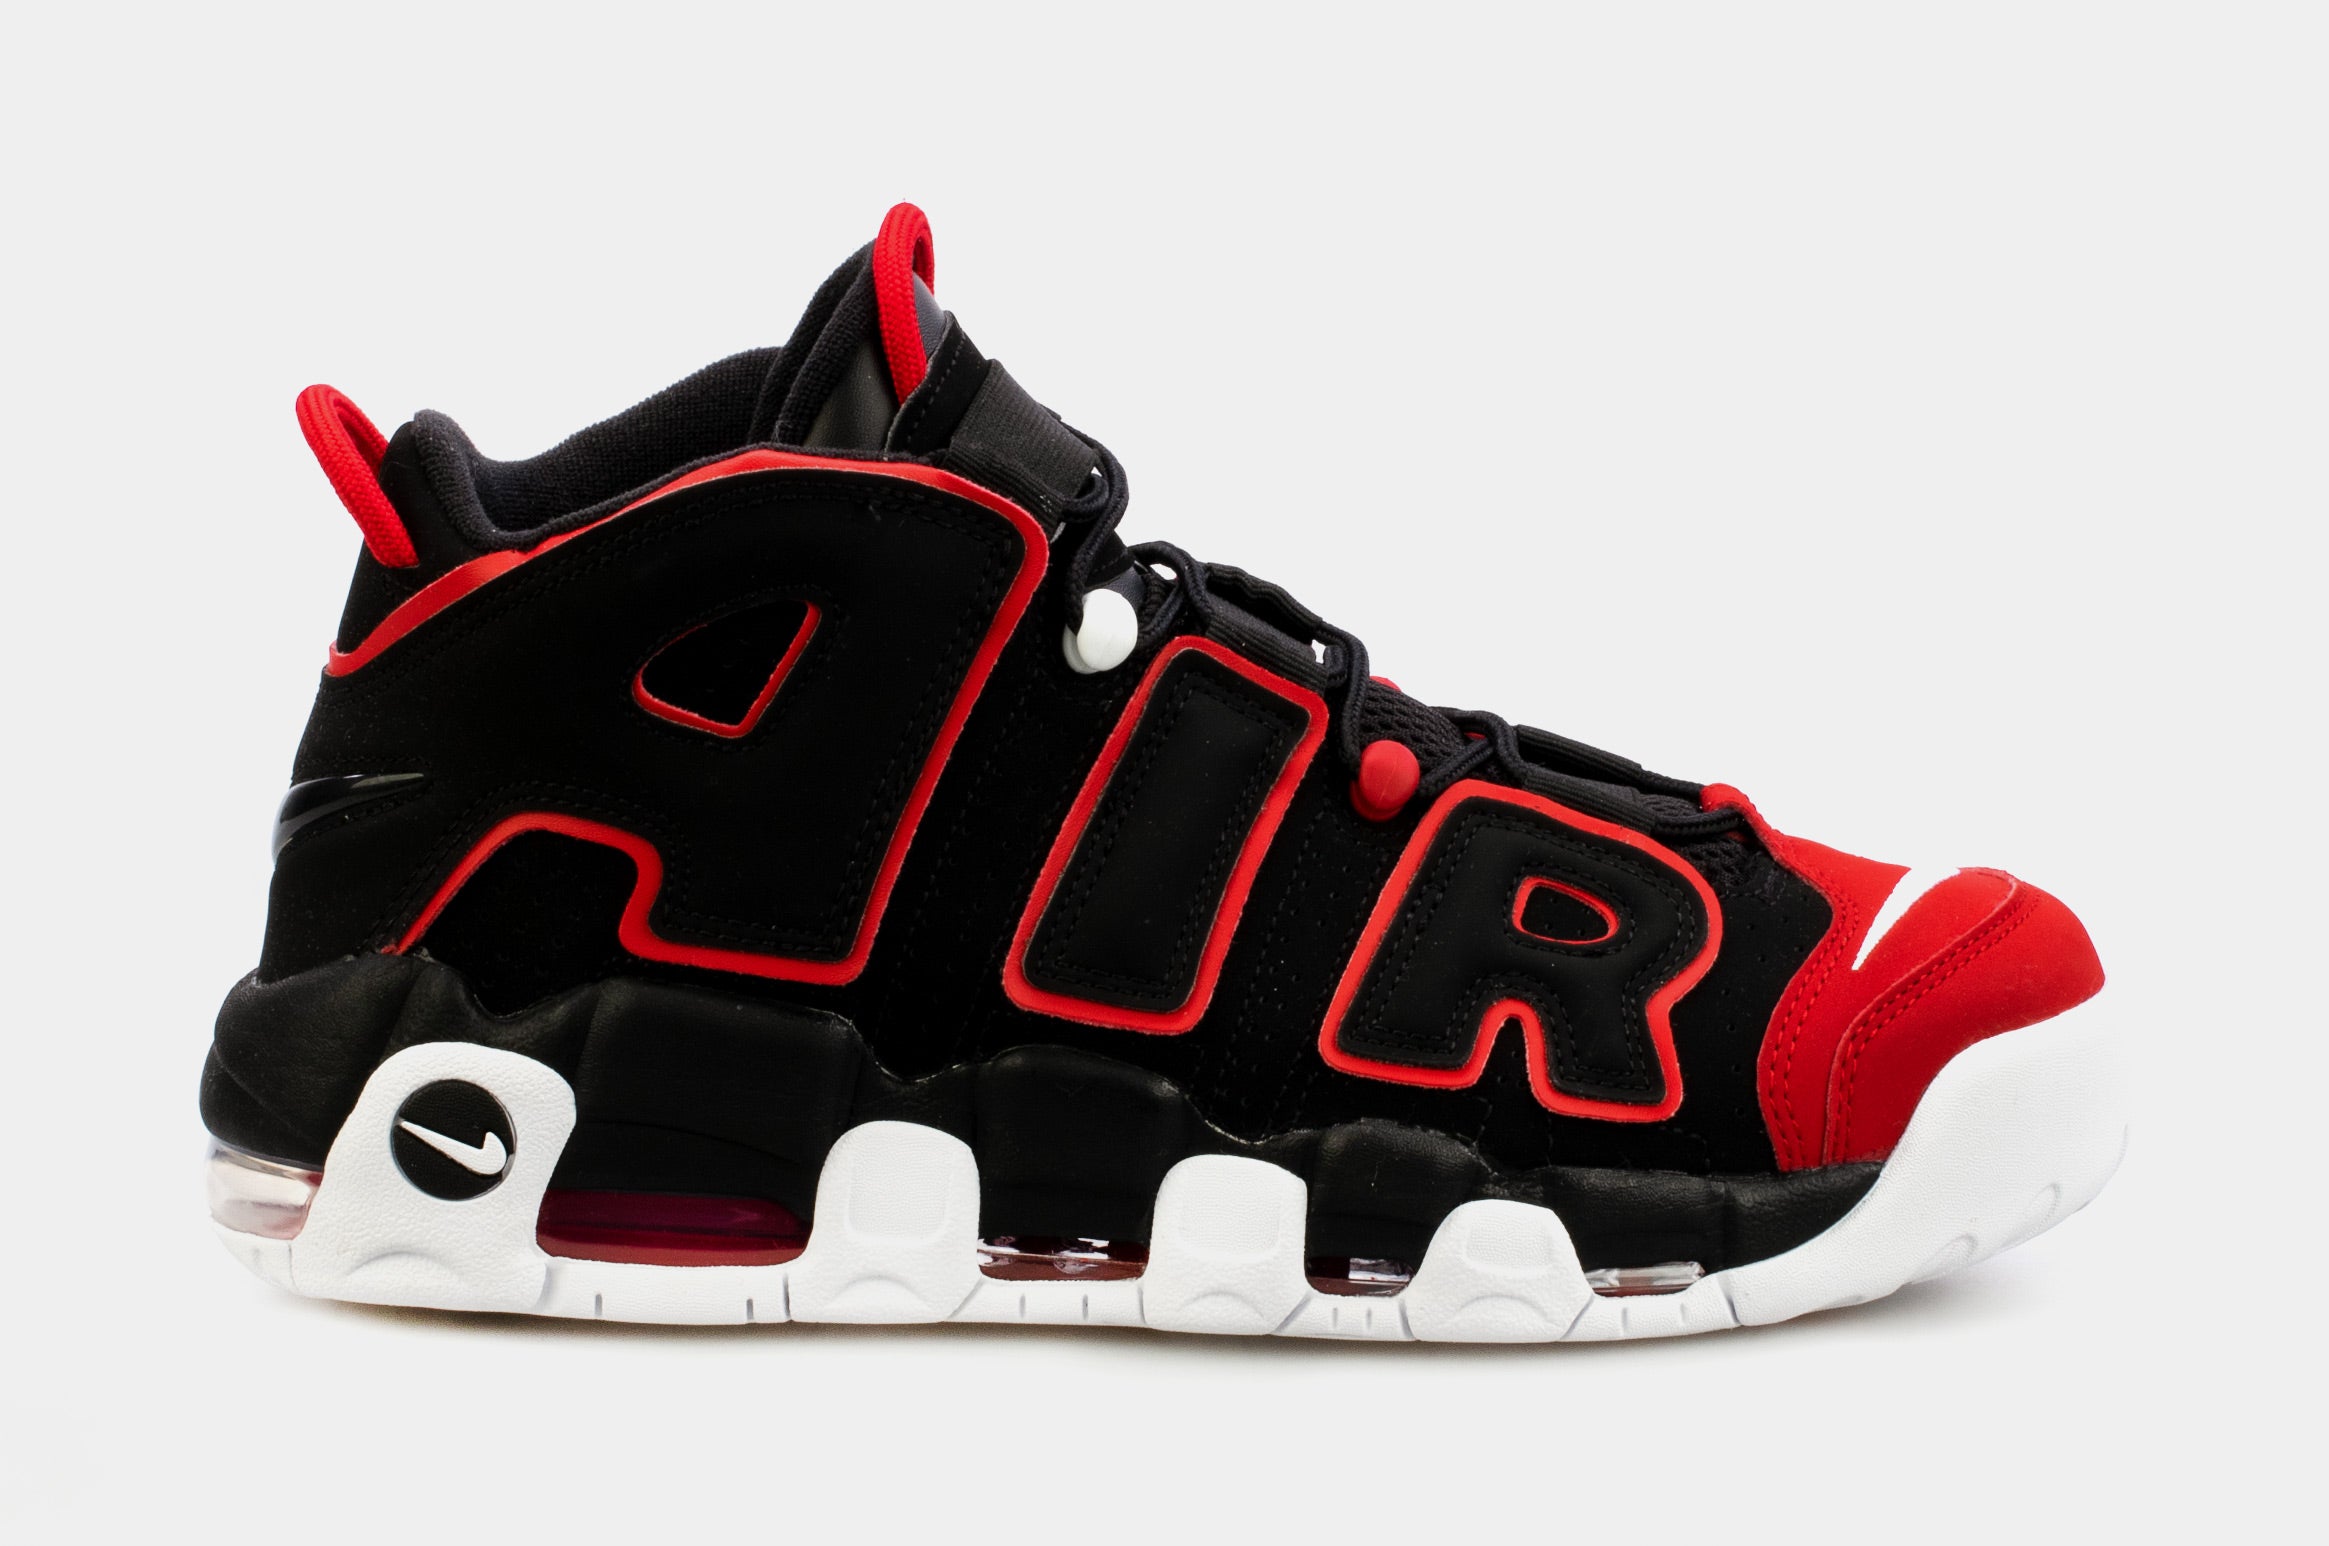 Nike More Uptempo Red Toe Mens Basketball Shoes Black Red FD0274-001 – Shoe